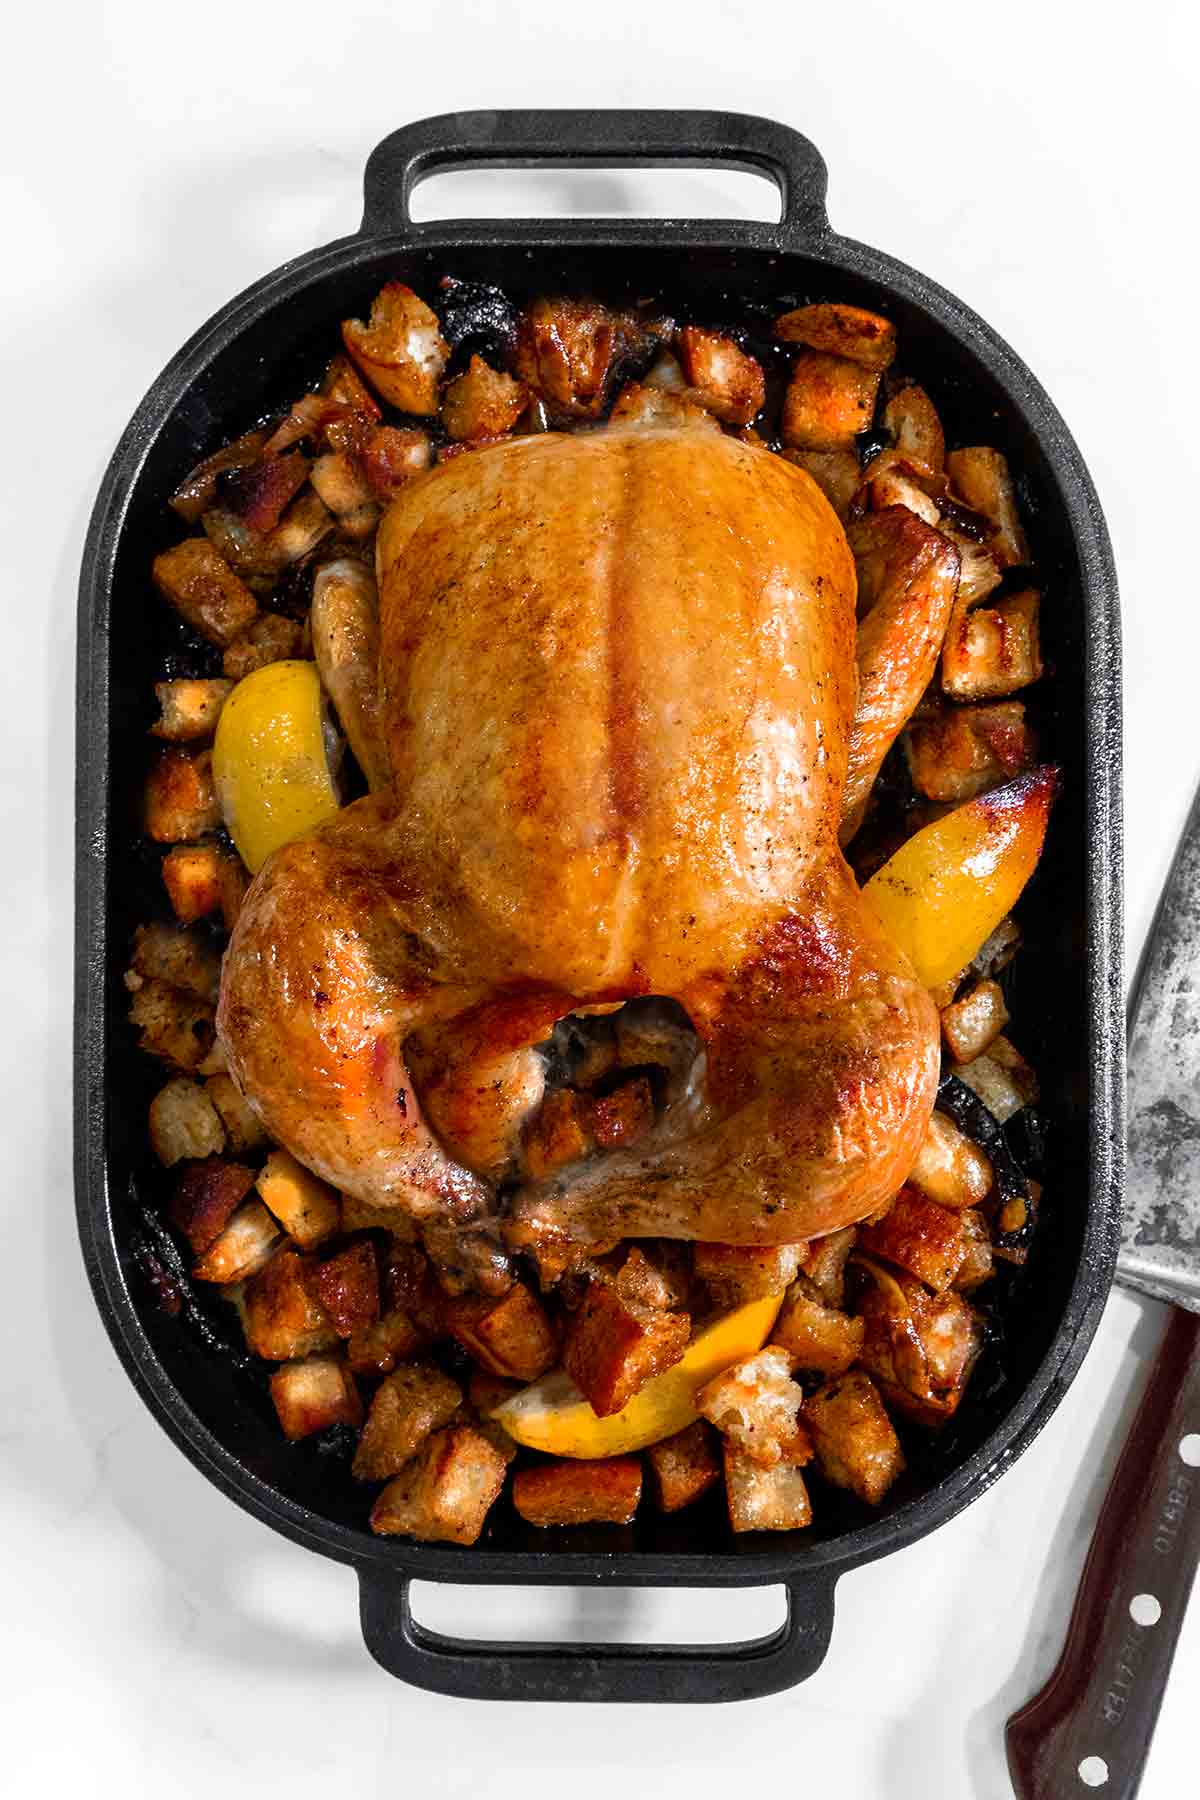 A roast lemon chicken on a bed of croutons in a metal roaster with a knife on the side.